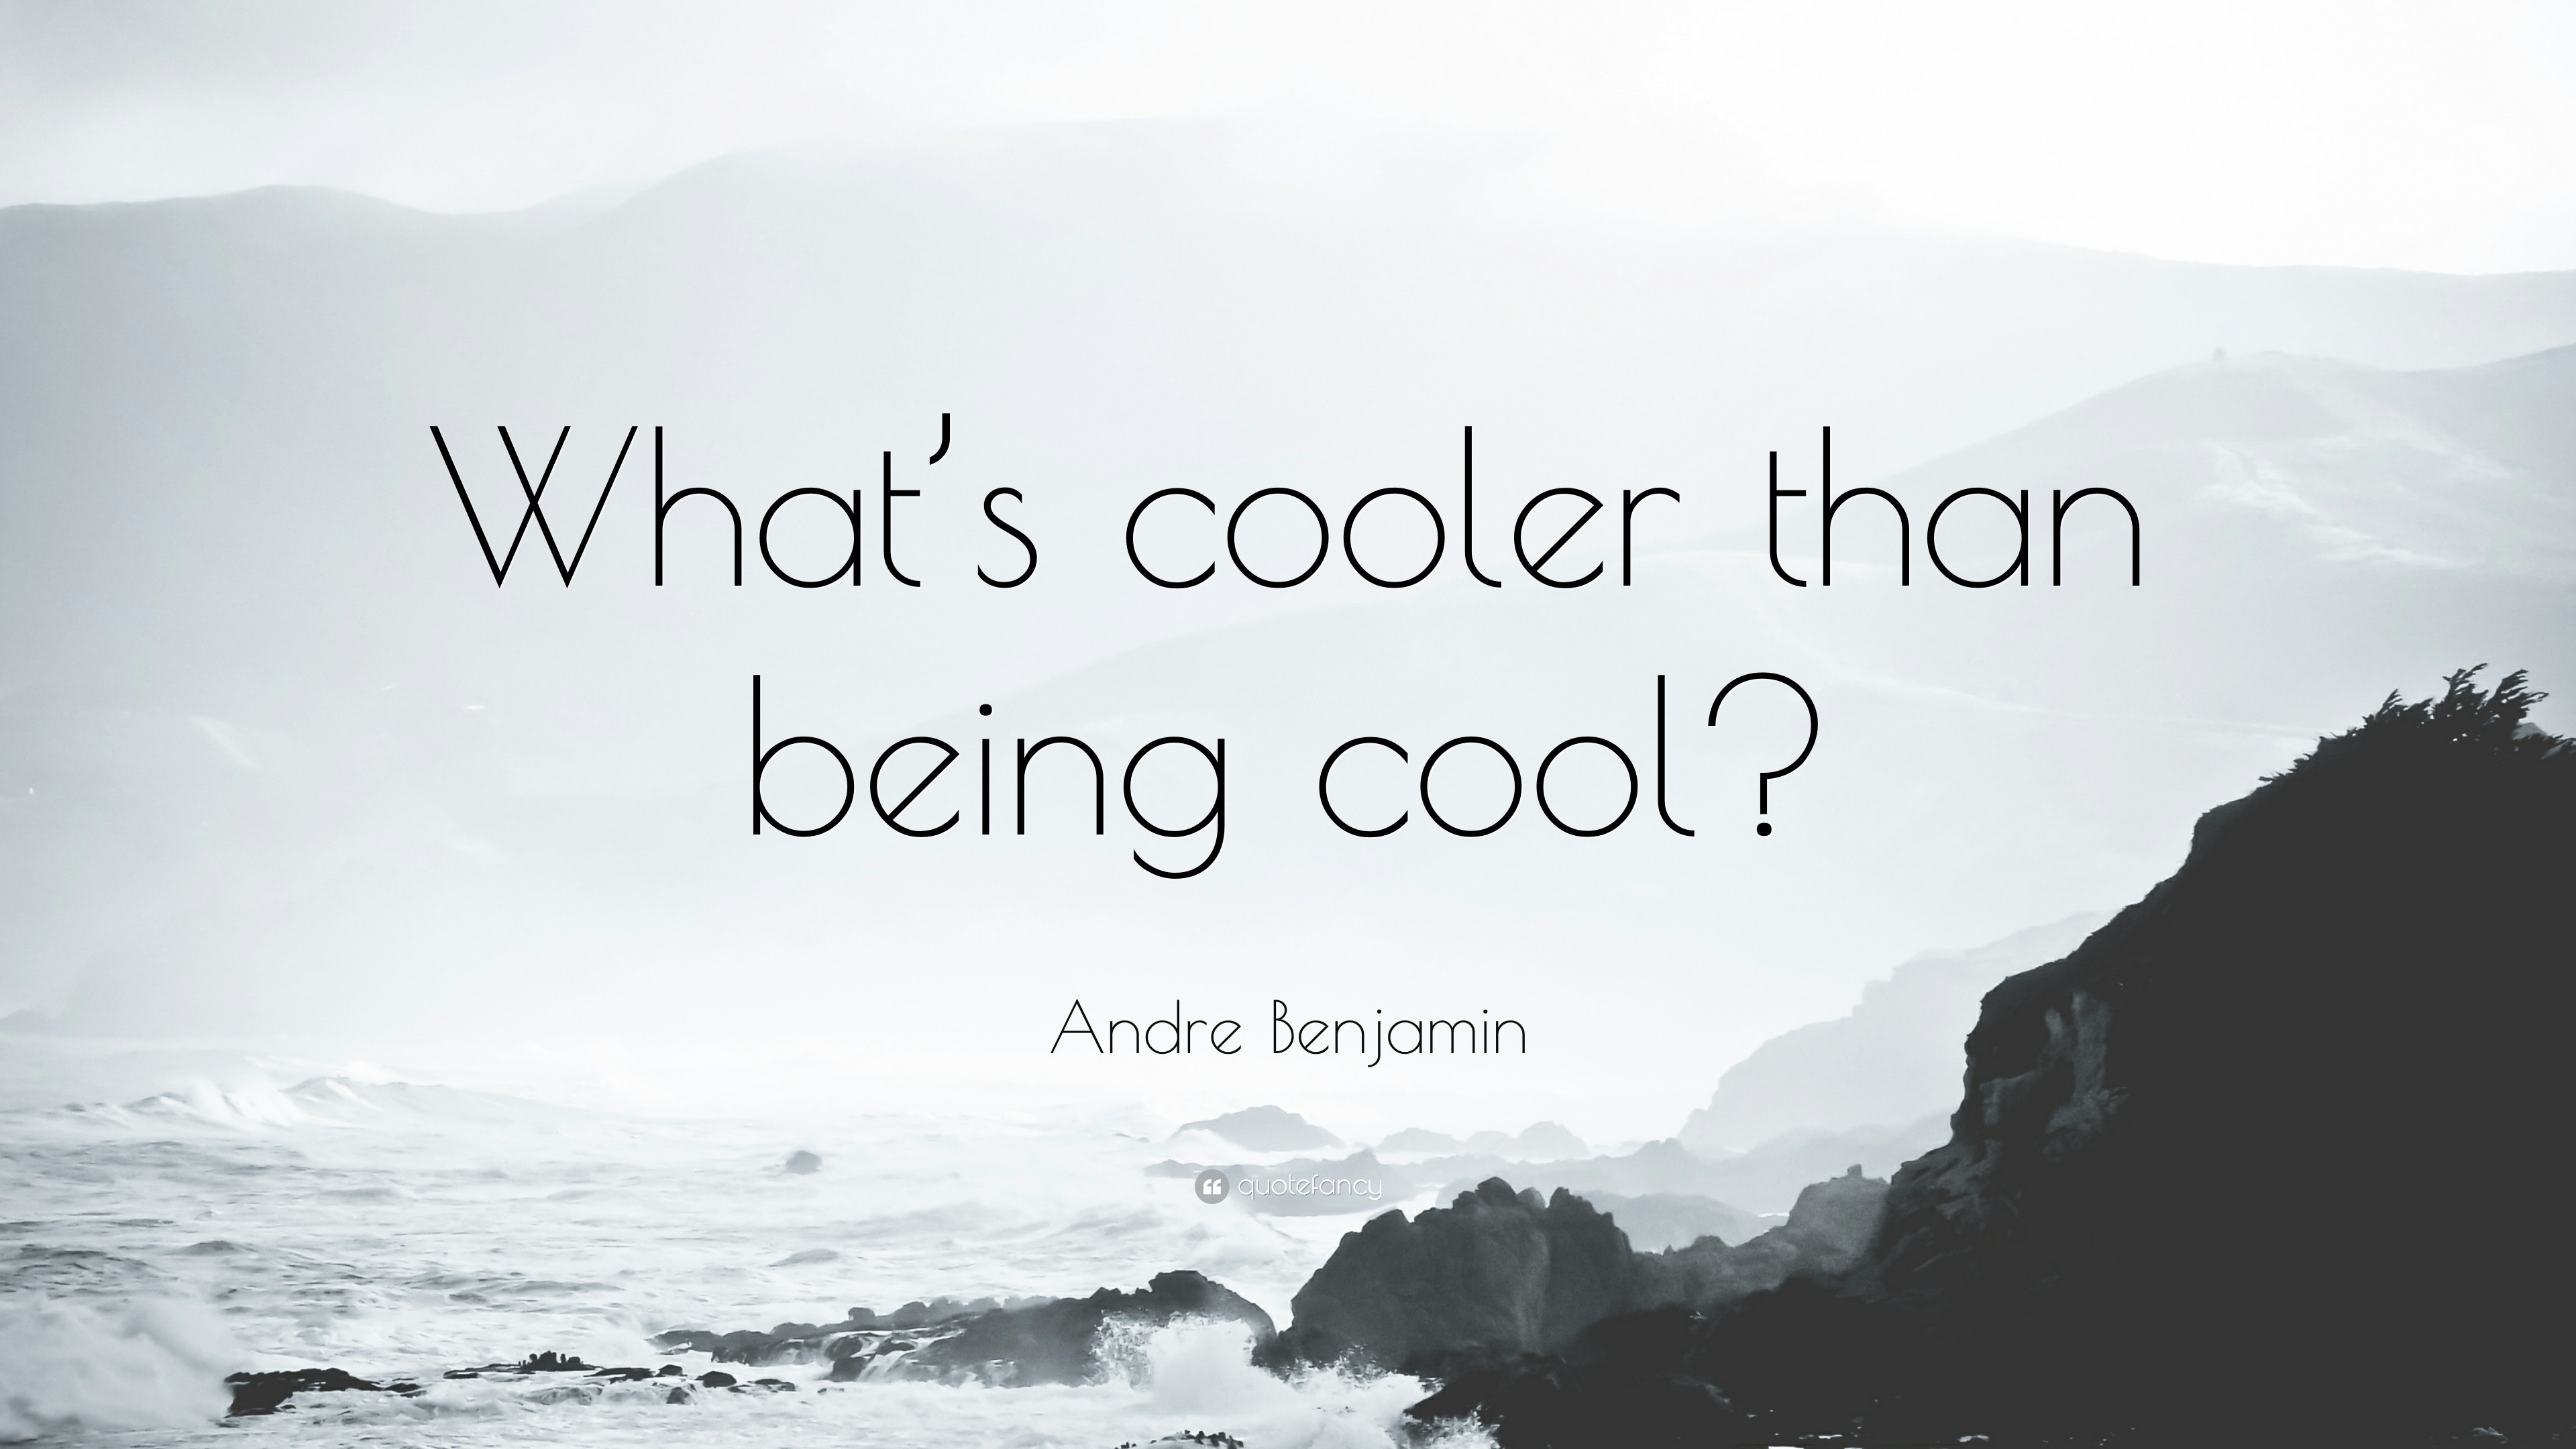 How to Be Cooler Than Cool